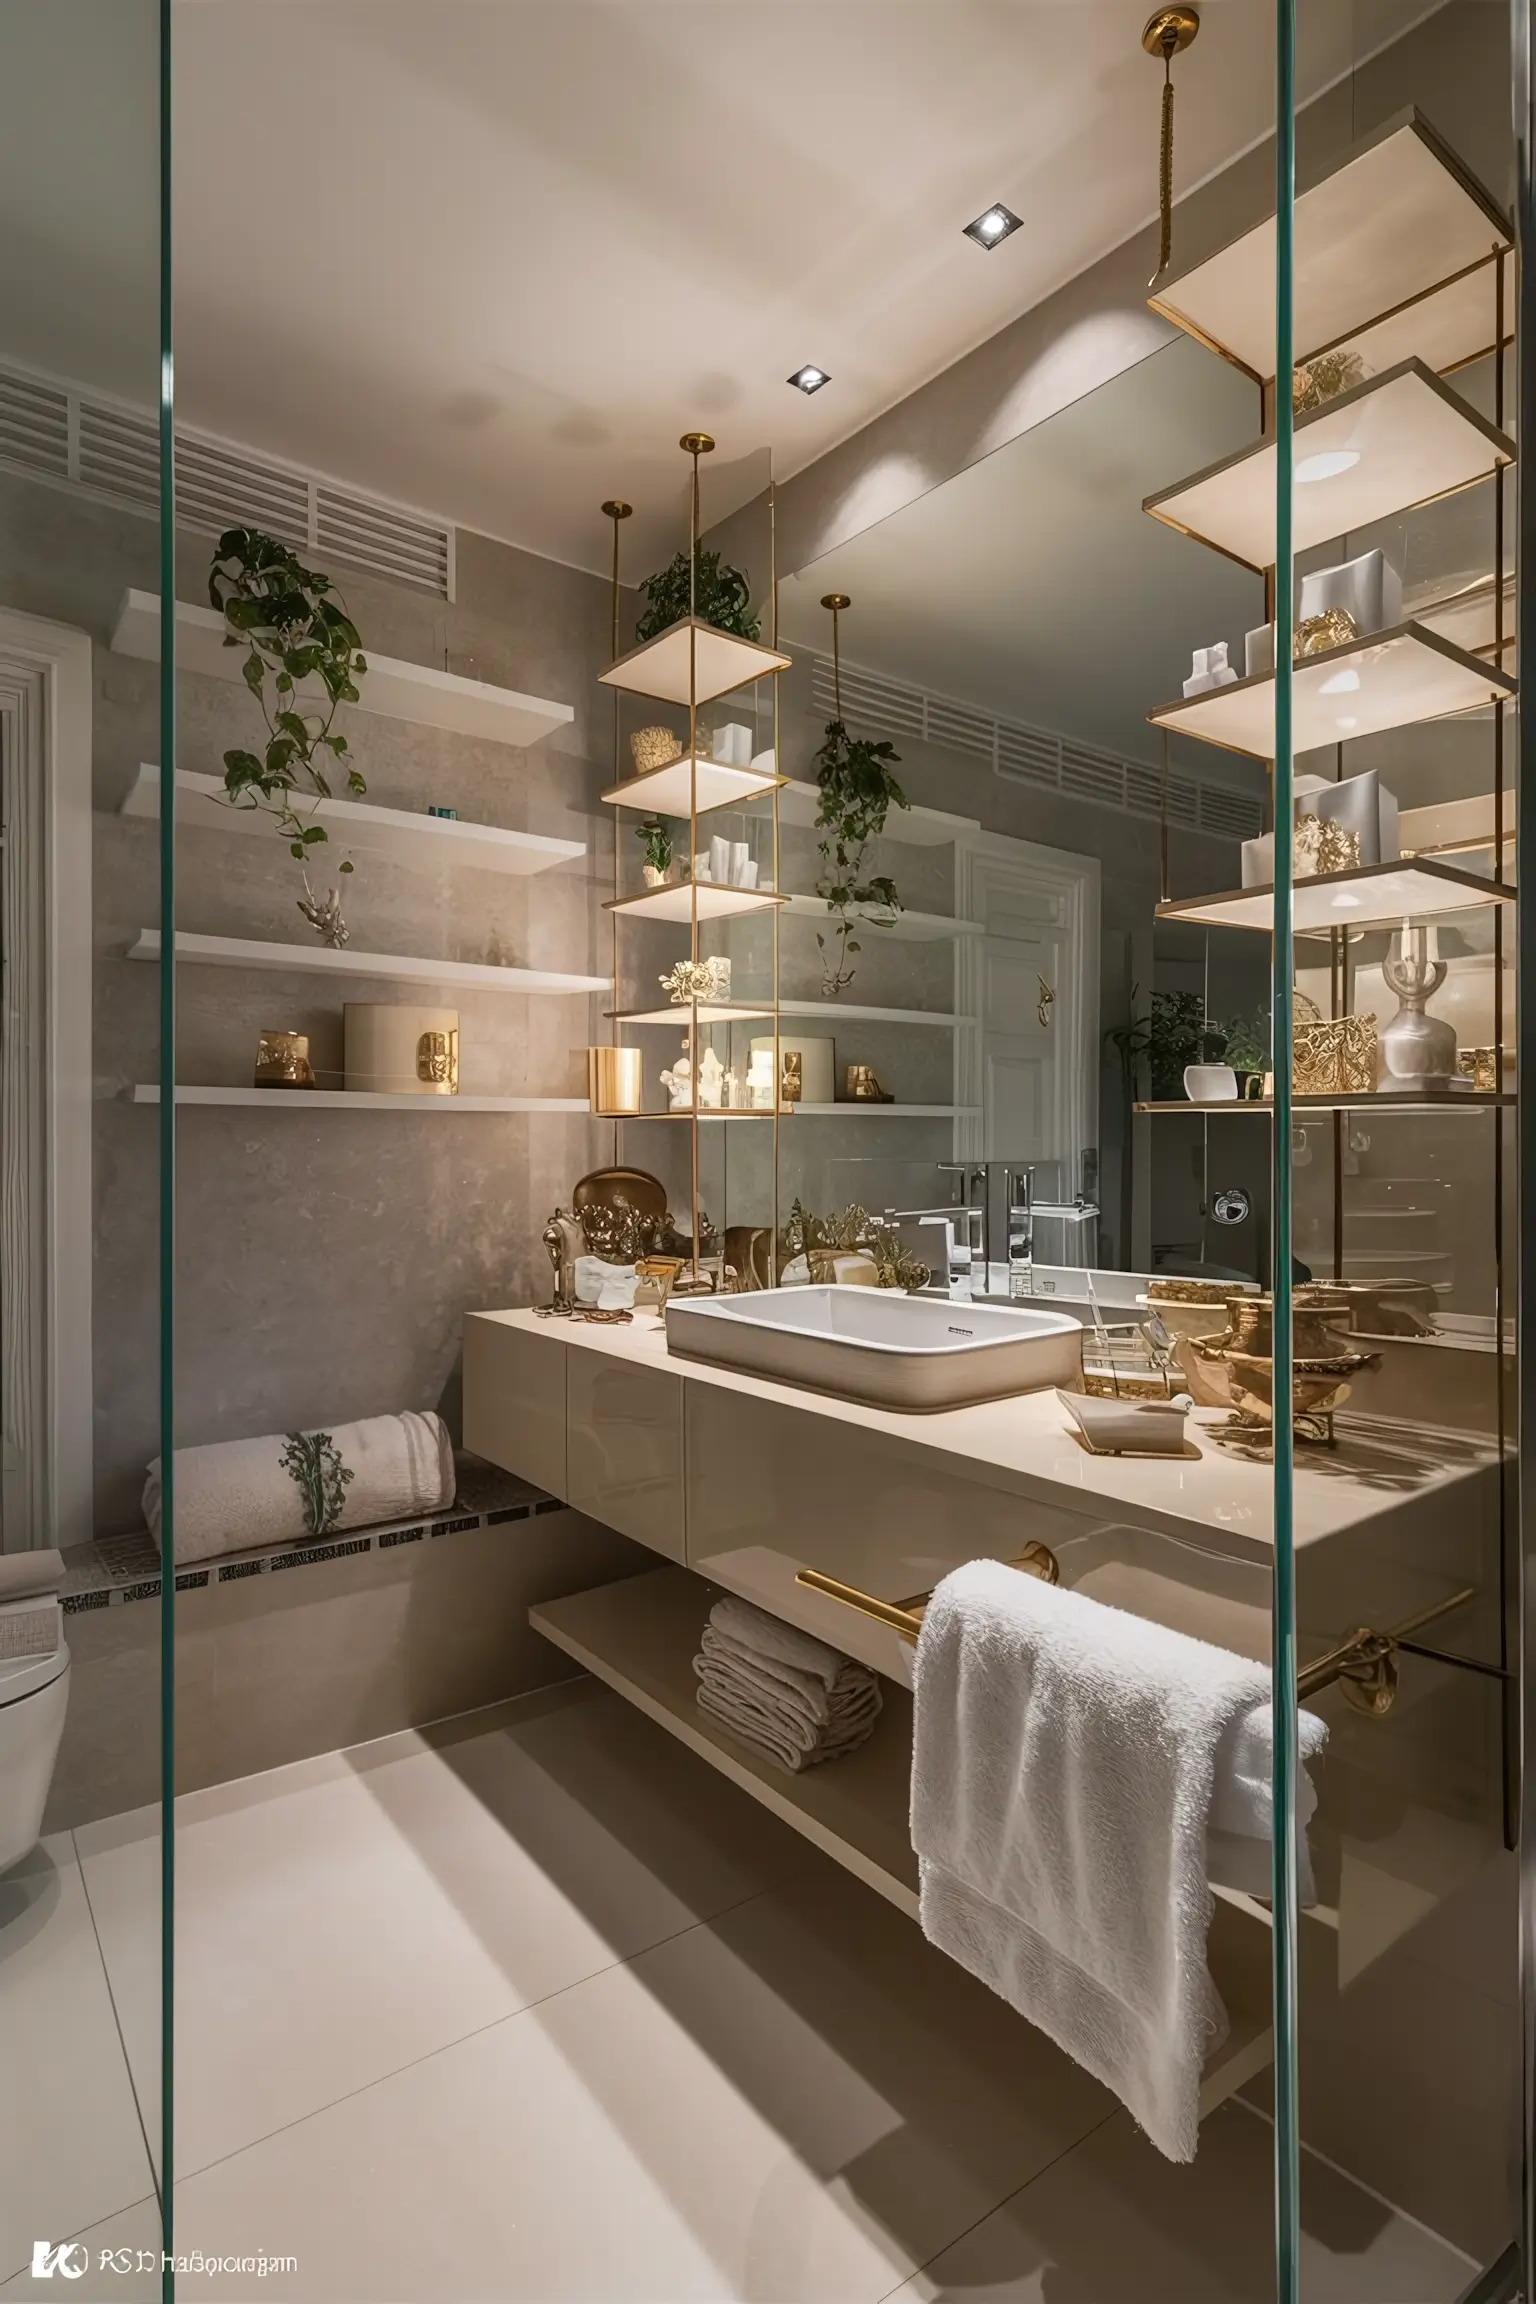 Small bathroom with floating shelves and a mix of zen and luxury decor.